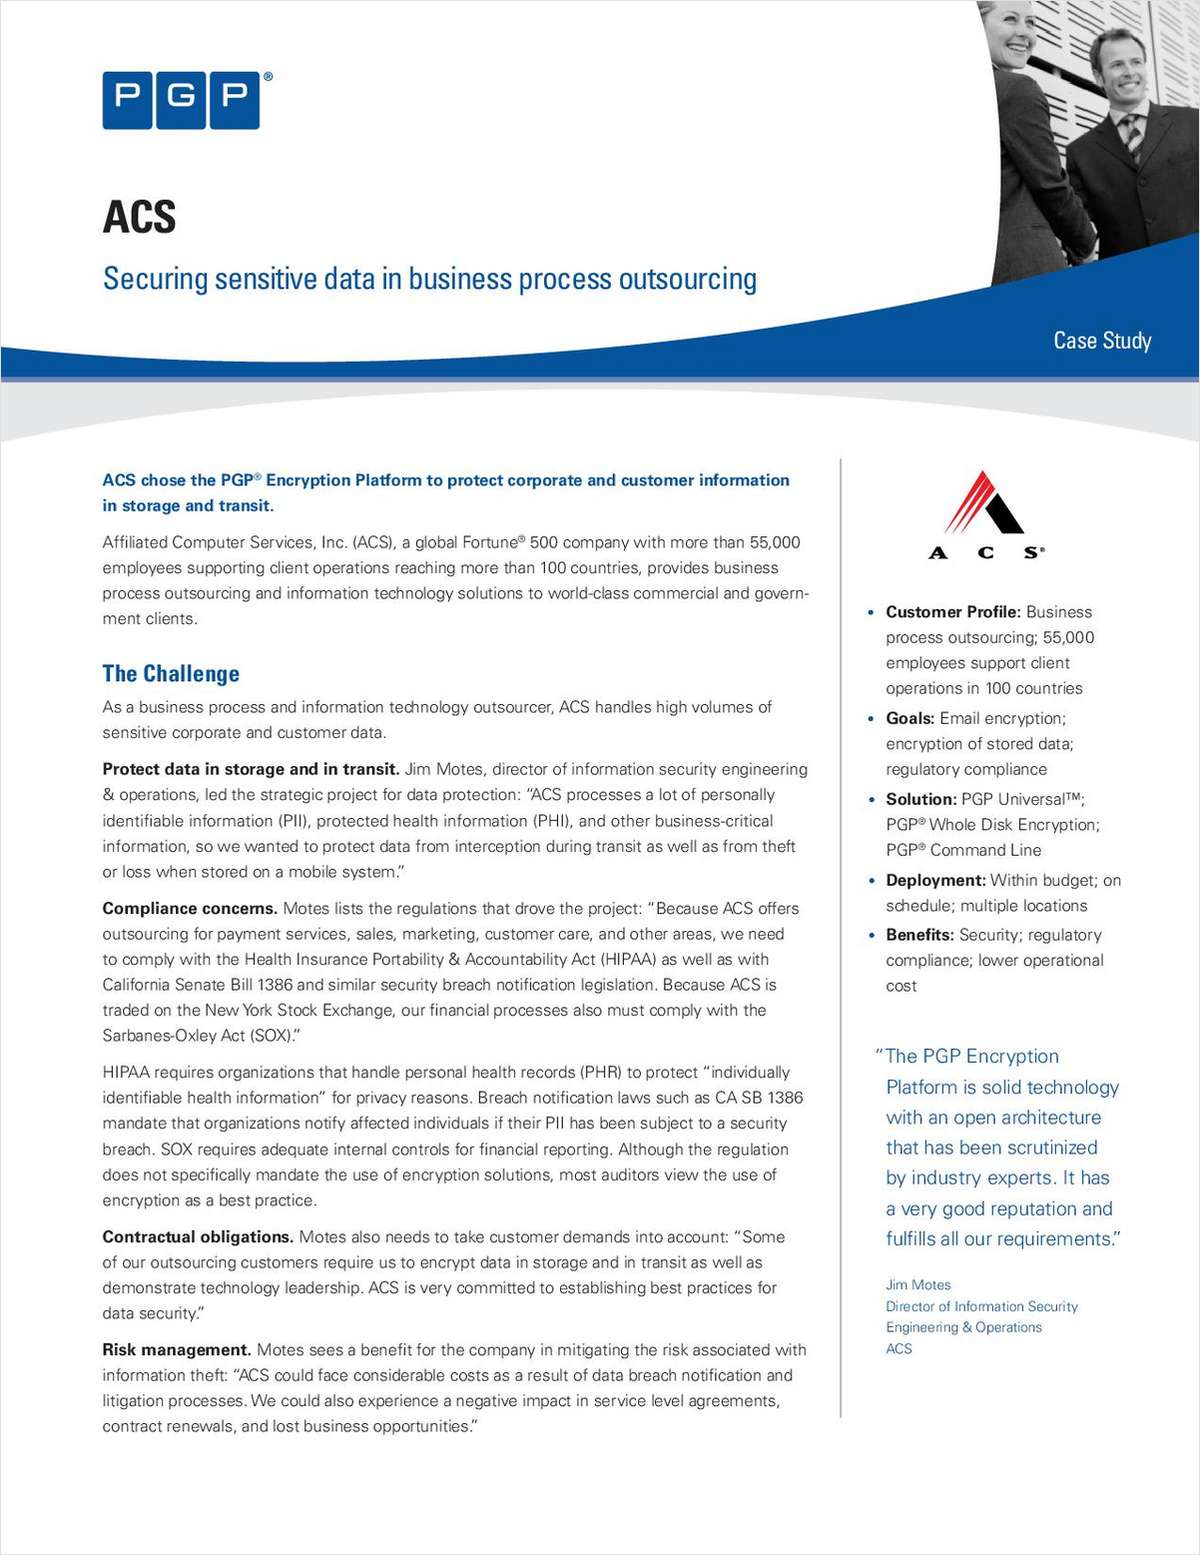 ACS: Securing Sensitive Data in Business Process Outsourcing